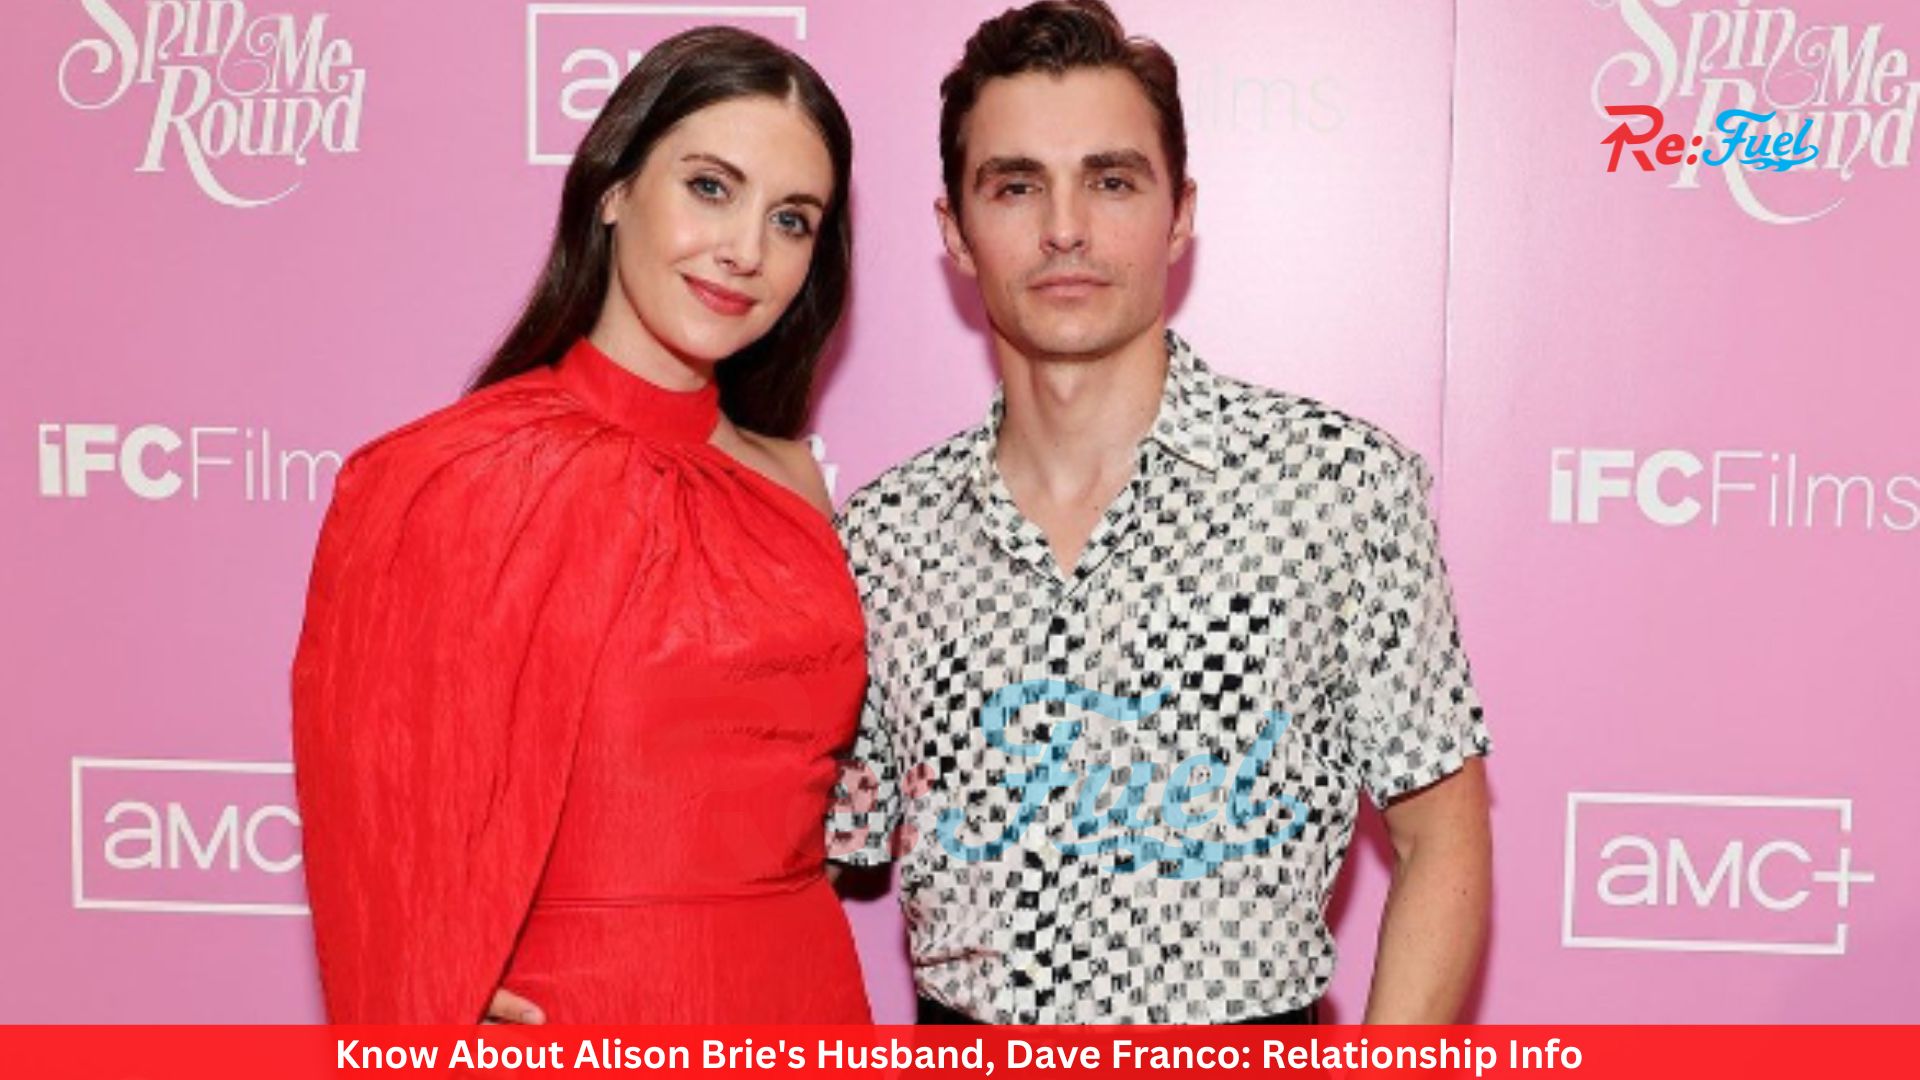 Know About Alison Brie's Husband, Dave Franco: Relationship Info